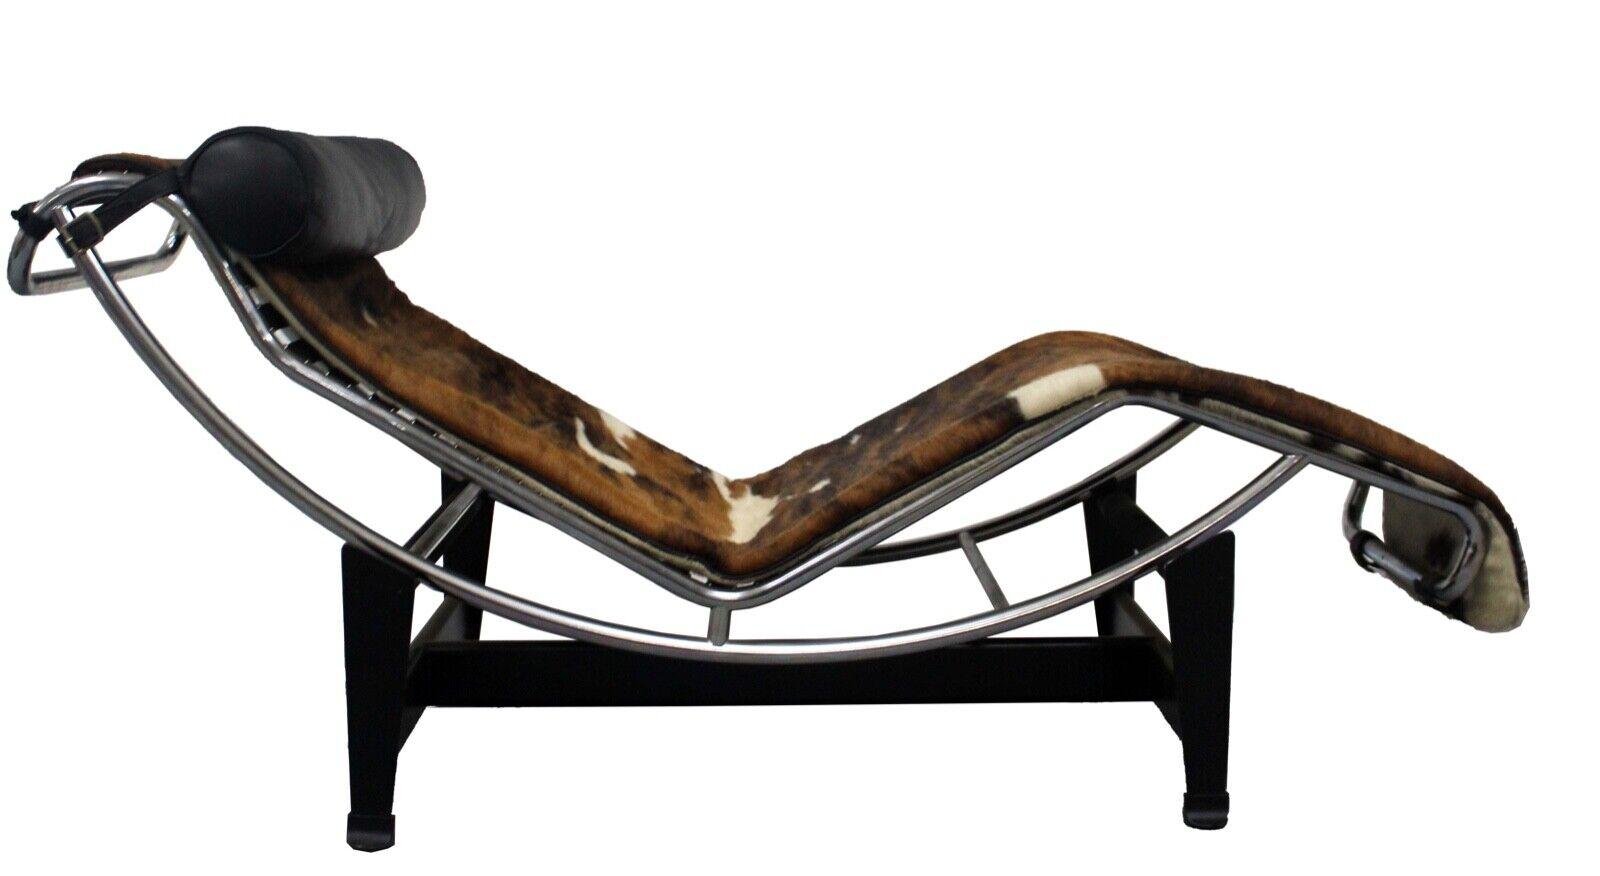 For your consideration is this iconic Le Corbusier for Cassina LC4 Ponyhair chaise lounge chair. Dimensions: 22.5 W x 65 D x 28 H seat height: 11